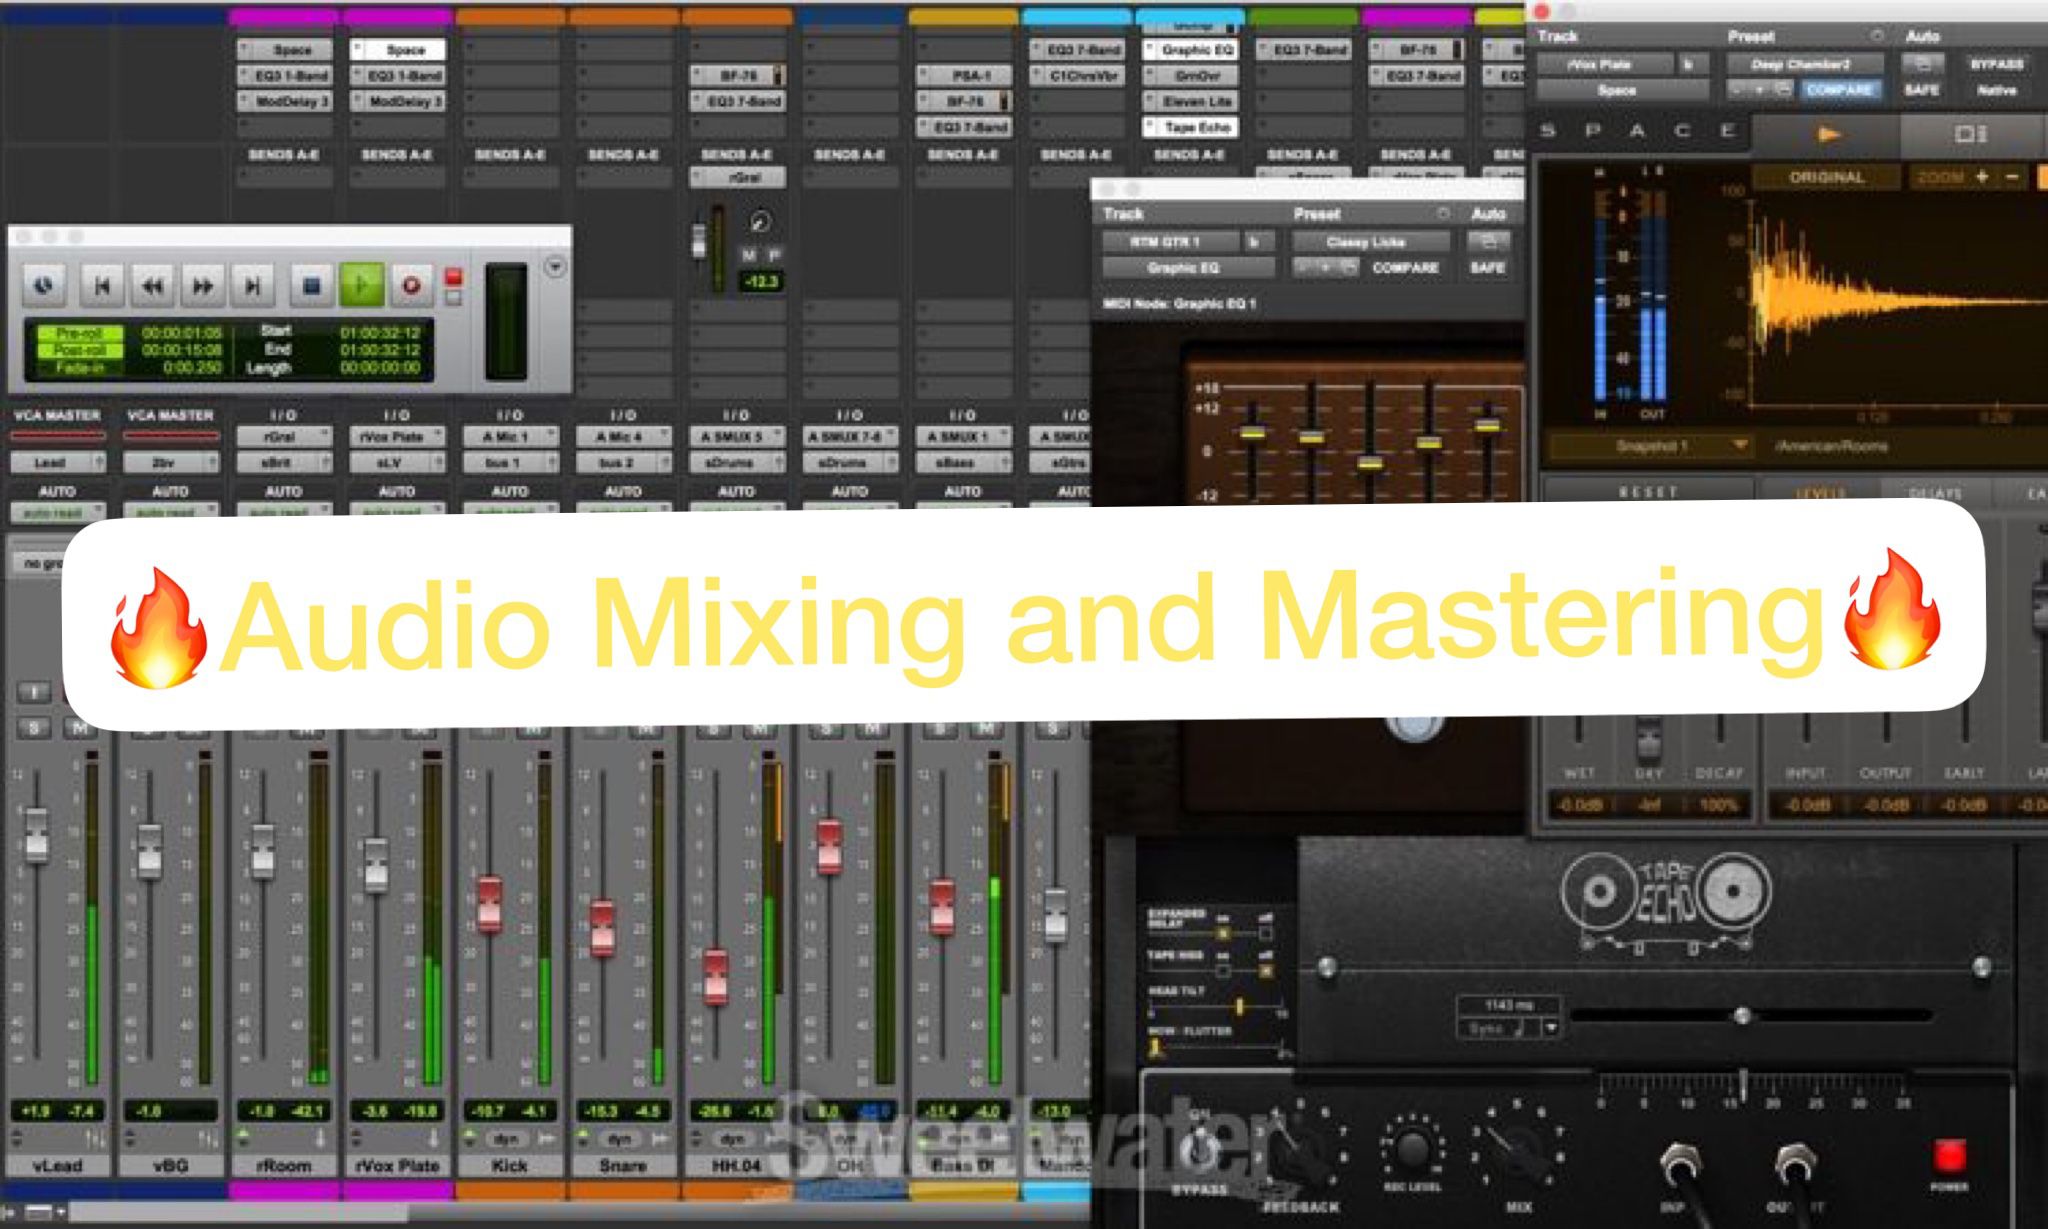 Pro Mixing And Mastering (any Genre, Or Audio Source)  1 - 2 Day Turn Around🔄. 15 Per Song 25 For 2